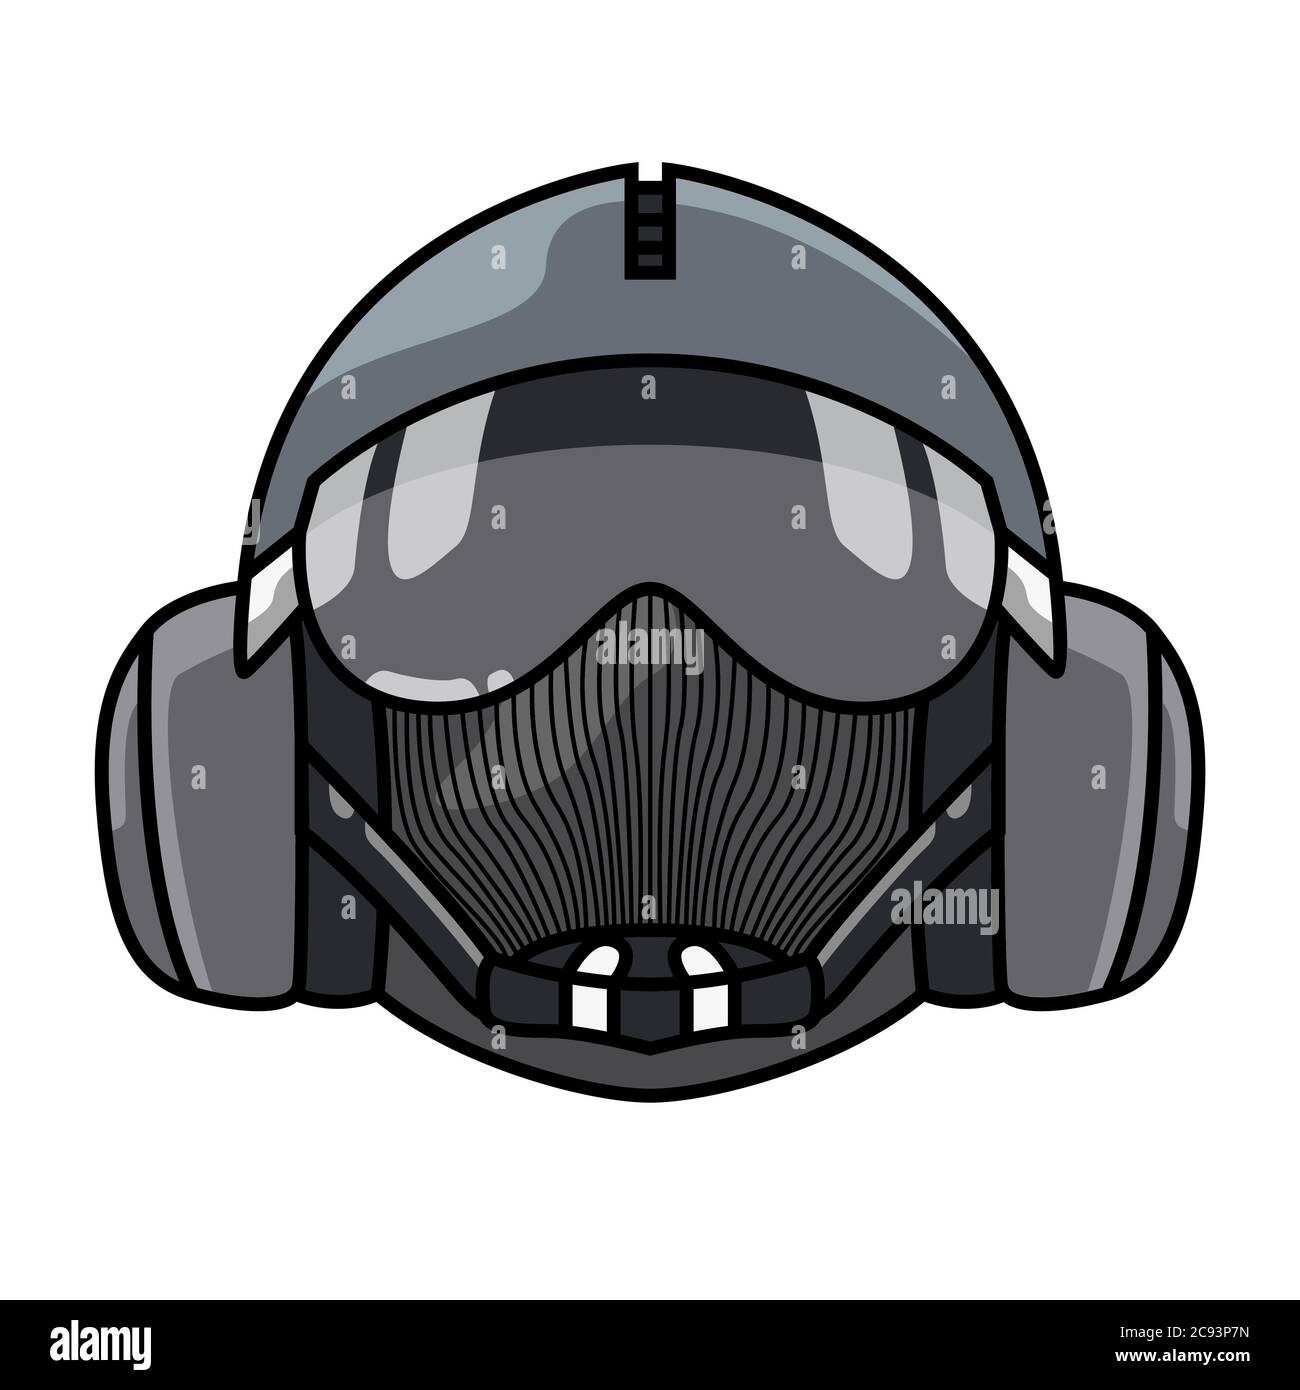 Helmet of the special forces, isolated Stock Vector